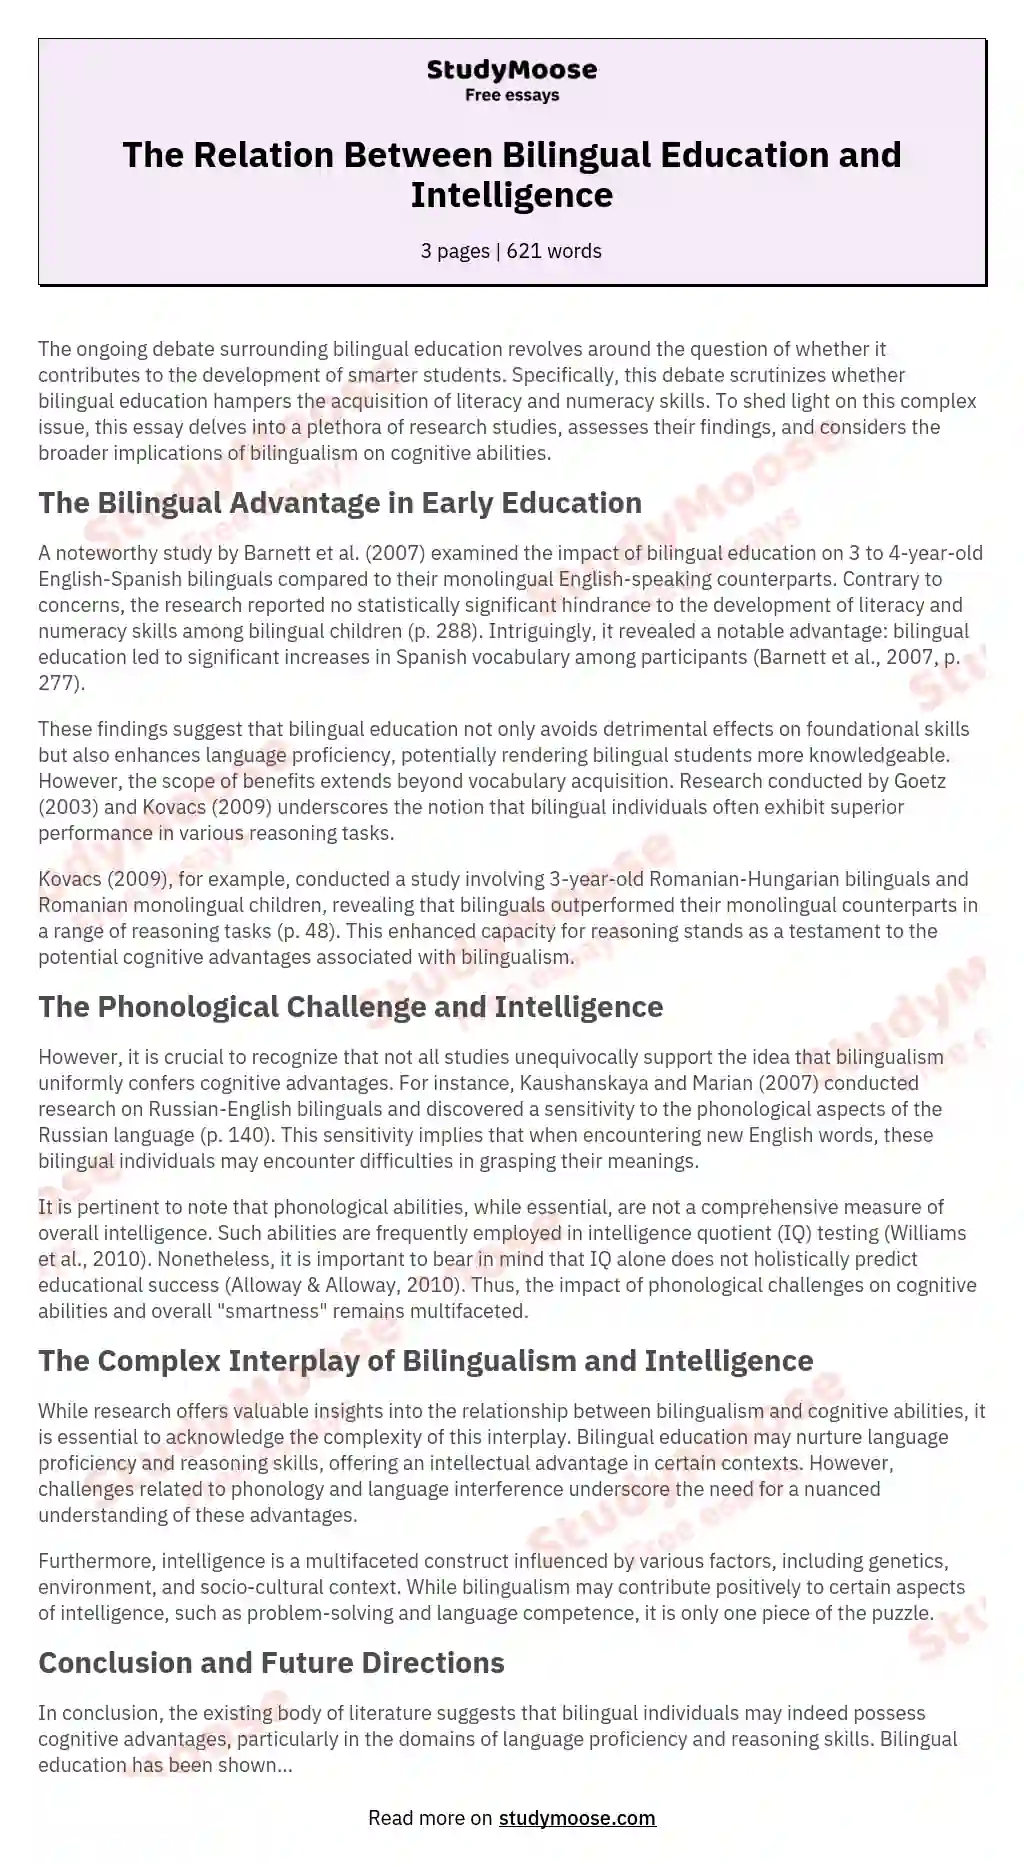 The Relation Between Bilingual Education and Intelligence essay